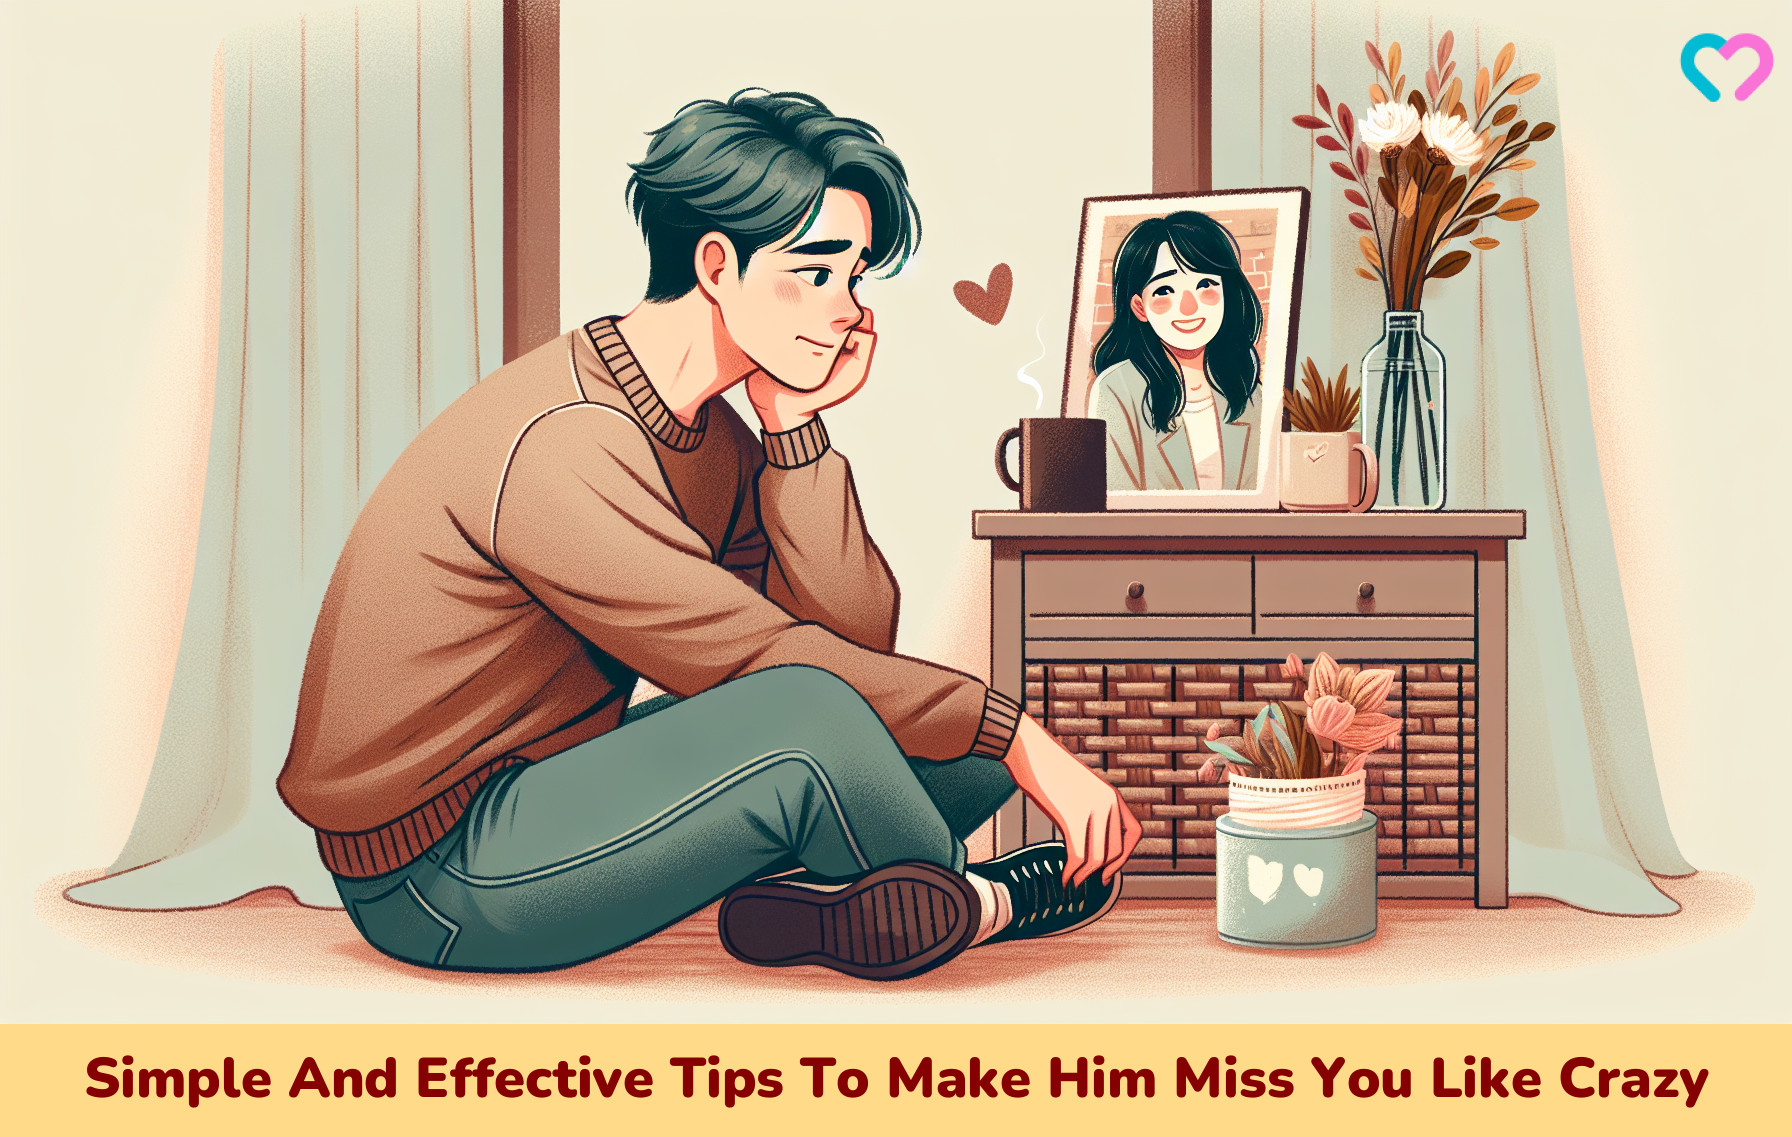 How To Make Him Miss You_illustration